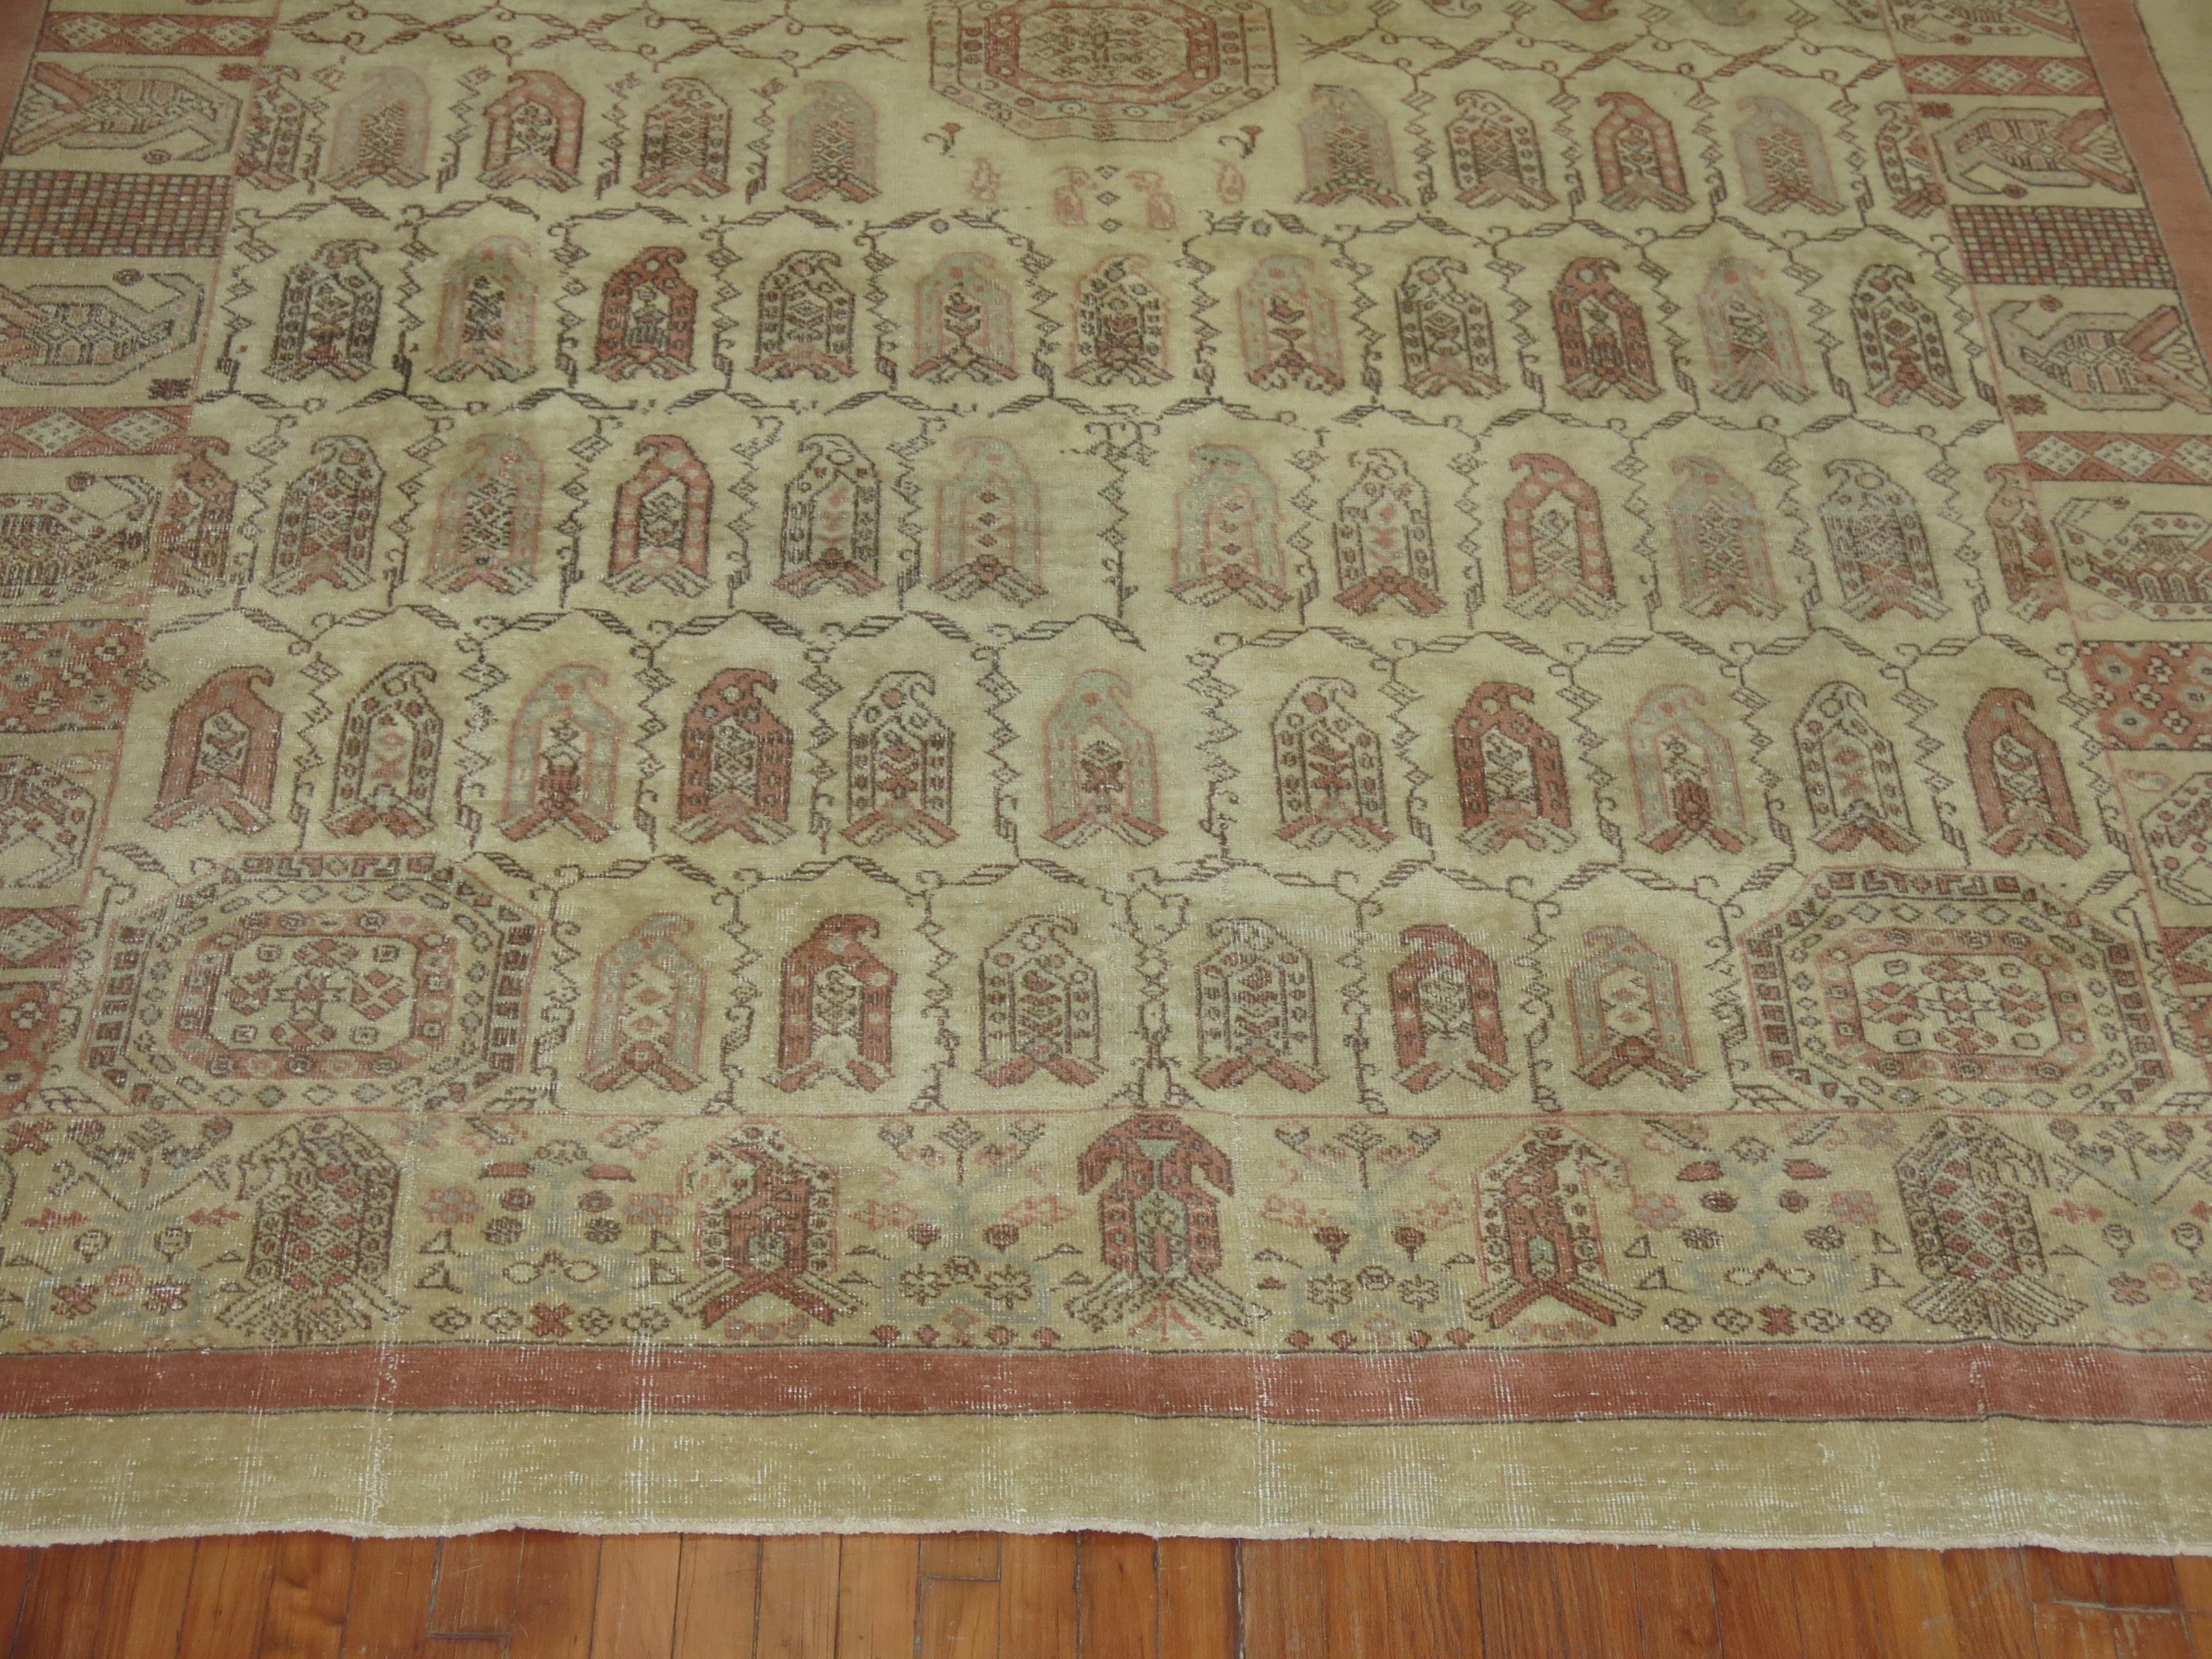 Room size mid-20th century Anatolian rug in crimson red and gray accents on beige/khaki ground.